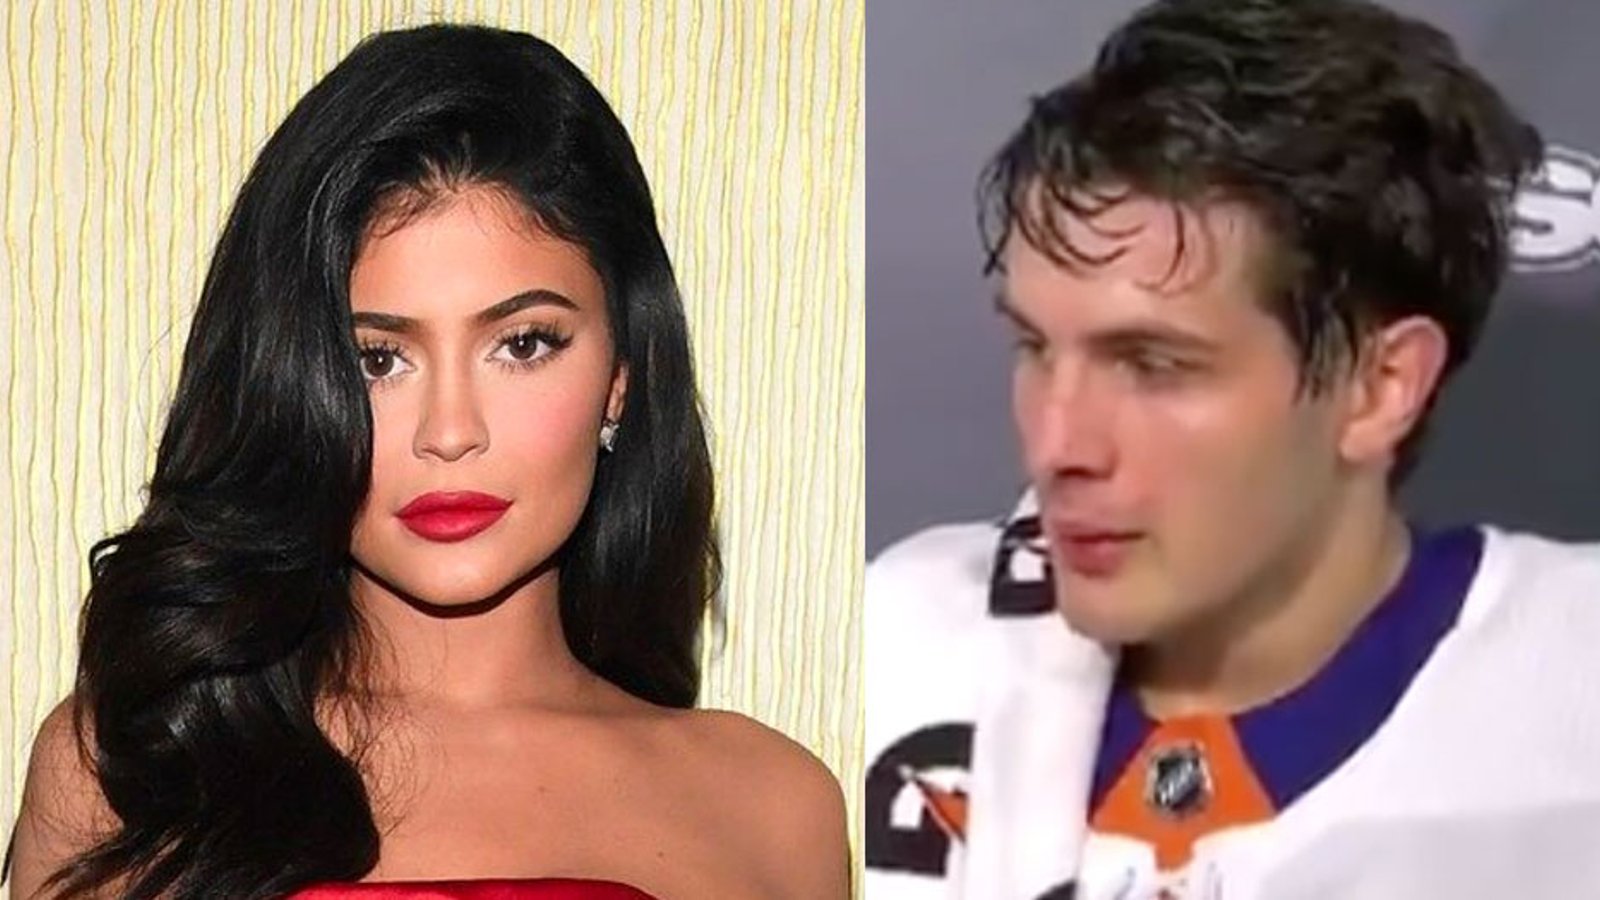 Mat Barzal takes hilarious shot at Kylie Jenner in game interview! 